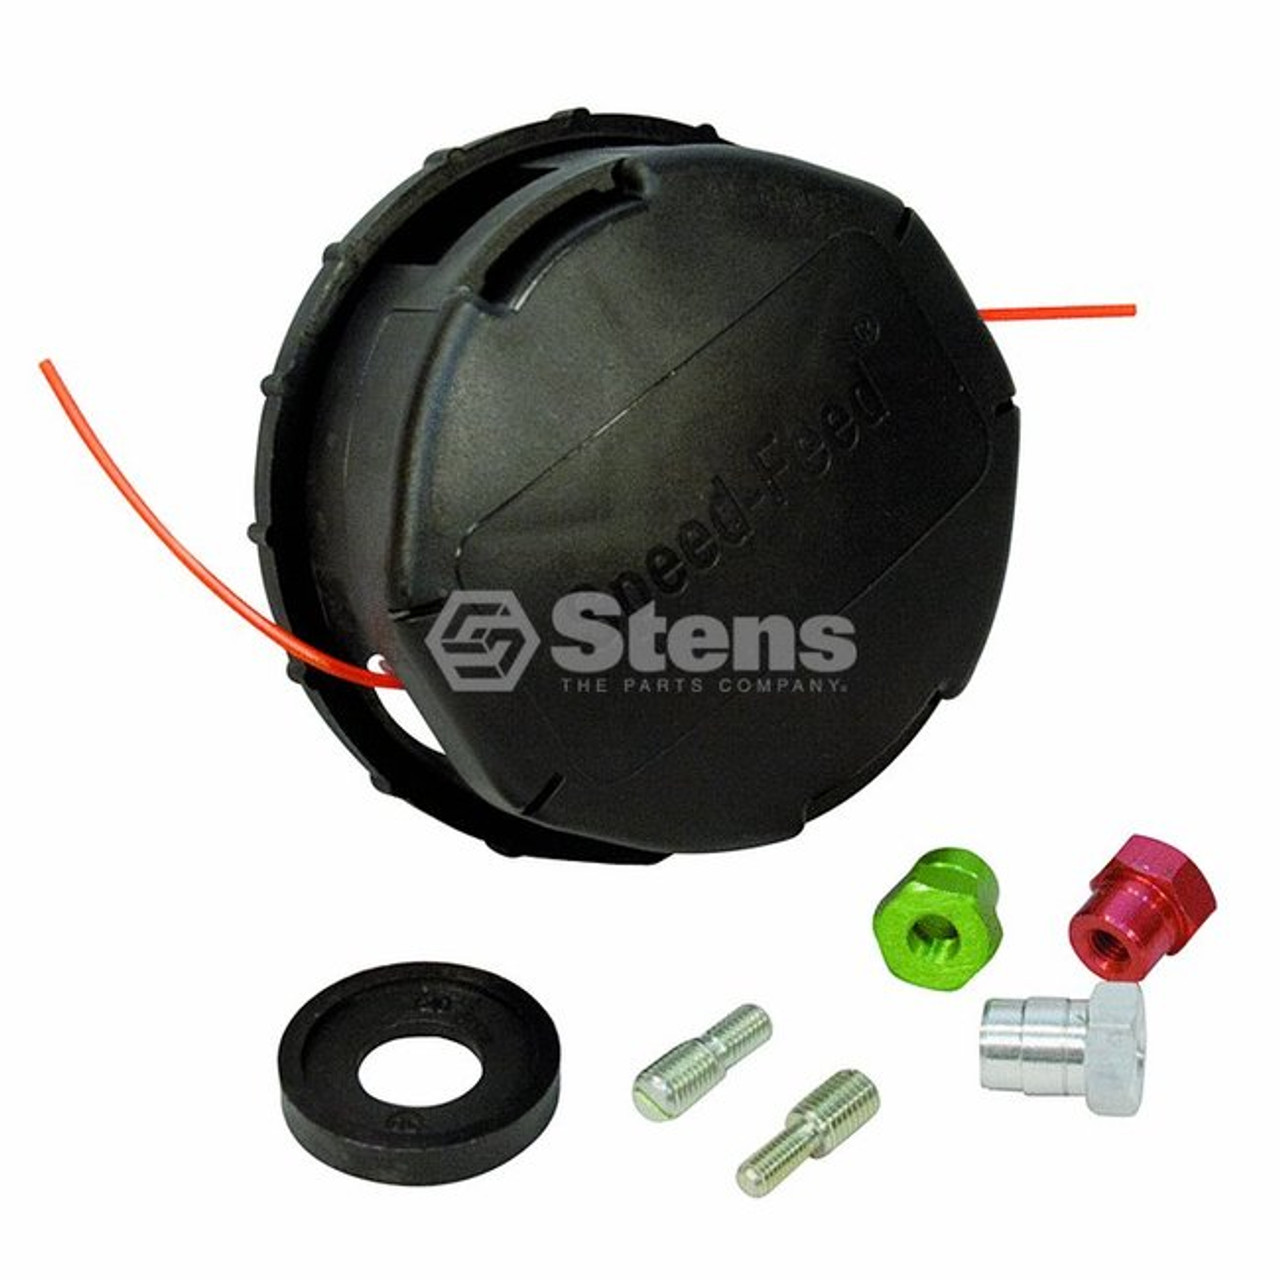 String Trimmer Head for Jonsered Big Red 400, BP40, BP40 Combi, BP2040, BR400, BR420, BR450, BR460, BR480, GR26D, GR26L, GR26 Combi, GR32L, GR32L Cat, GR2026CL, GR2026D, GR2032, GR2032D, GR2032L, GR2036, GR41